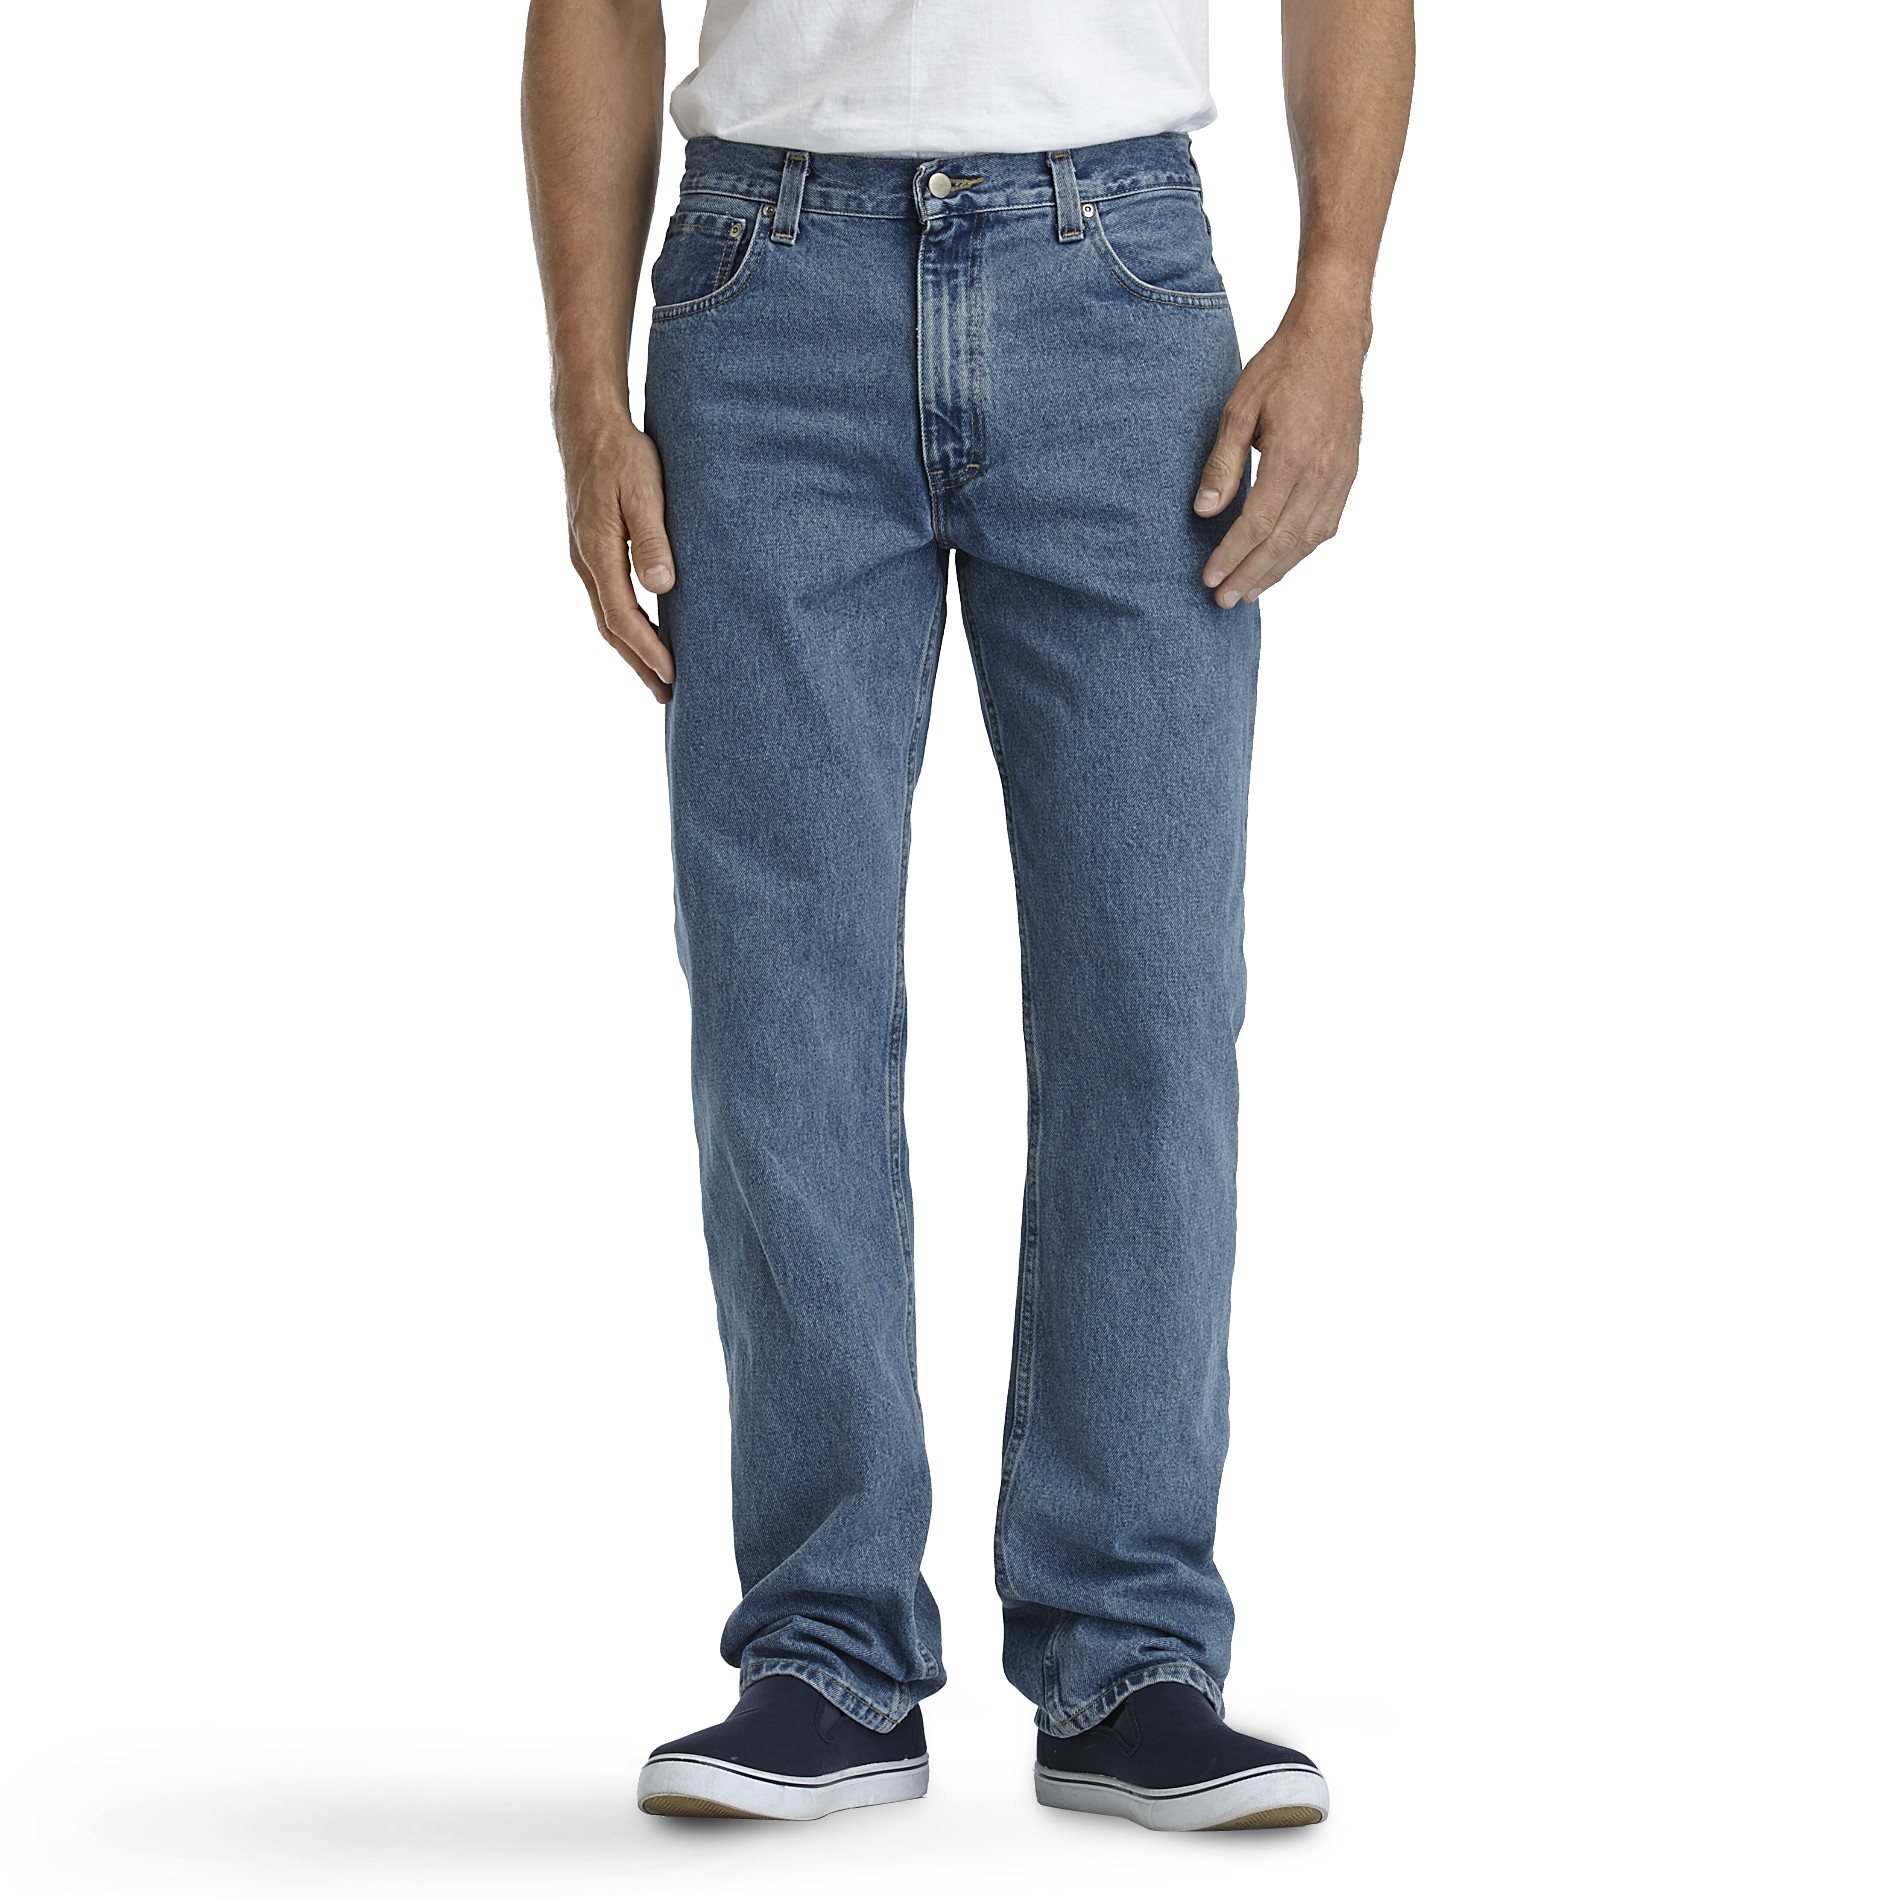 Basic Editions Men's Relaxed Fit Denim Jeans